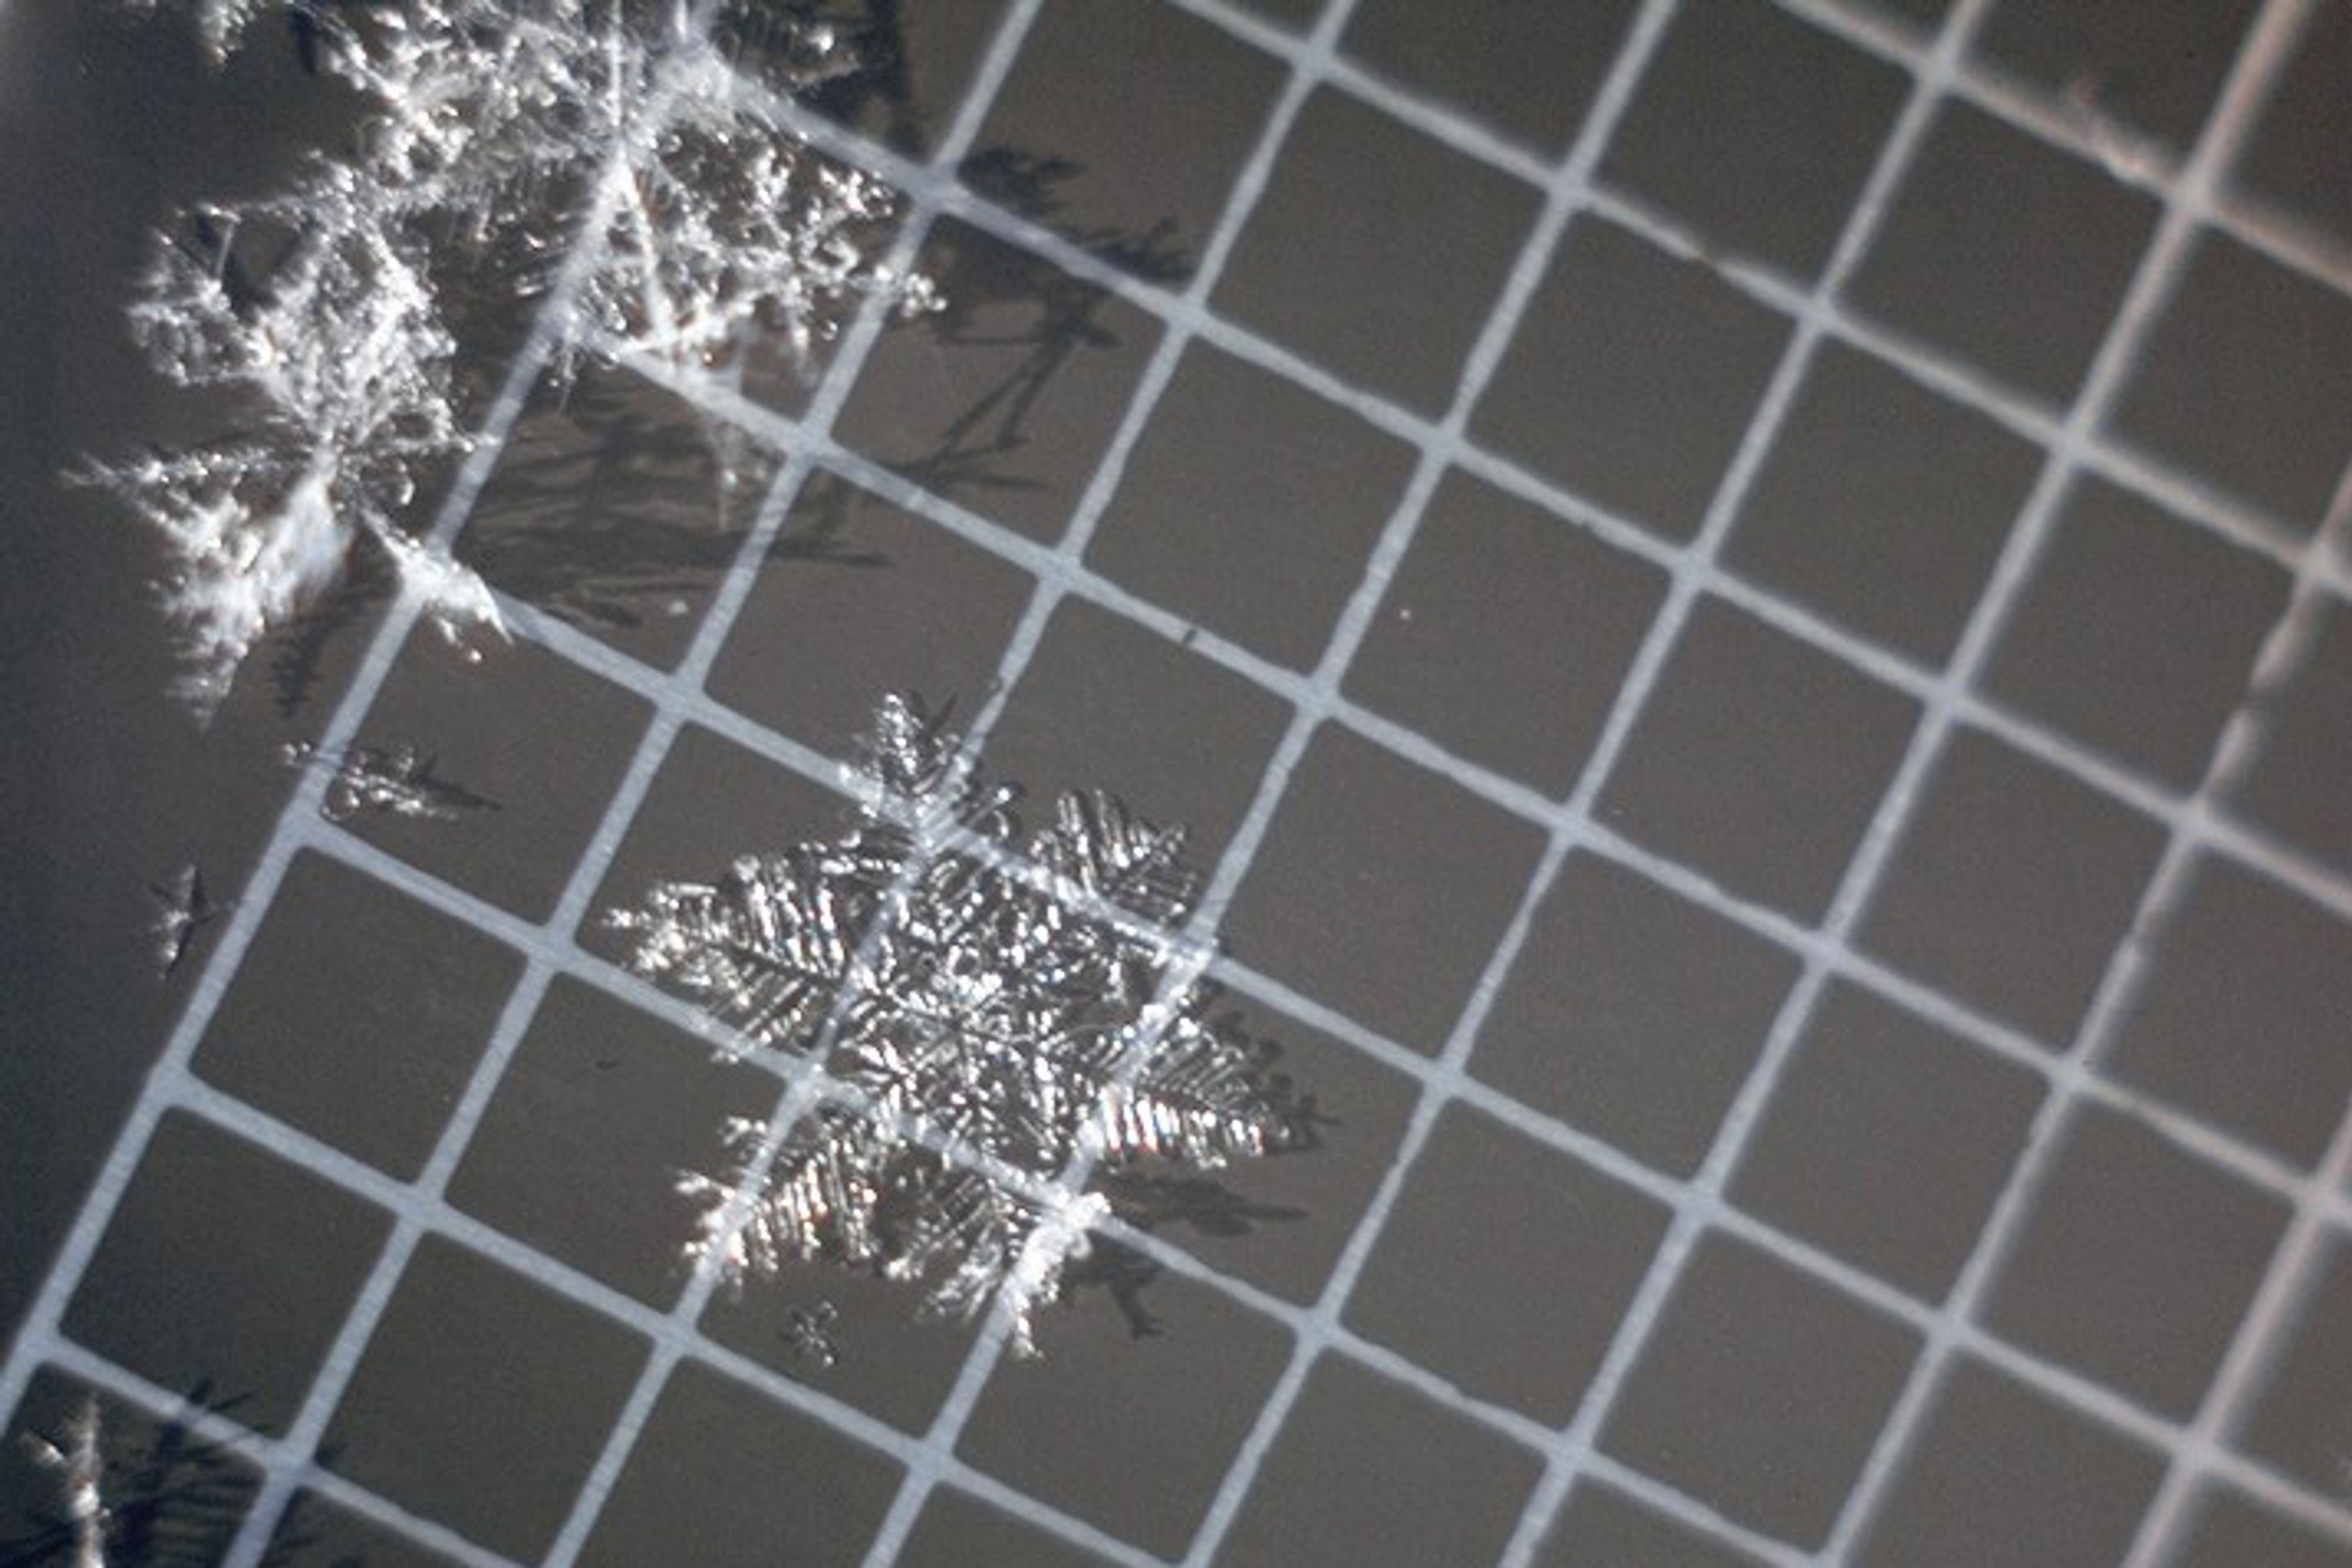 These are the classic, six-pointed snowflakes you drew in school. If these crystals are about 3mm or larger, they can form a weak layer. This type of weak layer will last anywhere from a few hours to a few days before they start bonding to the surrounding snow.